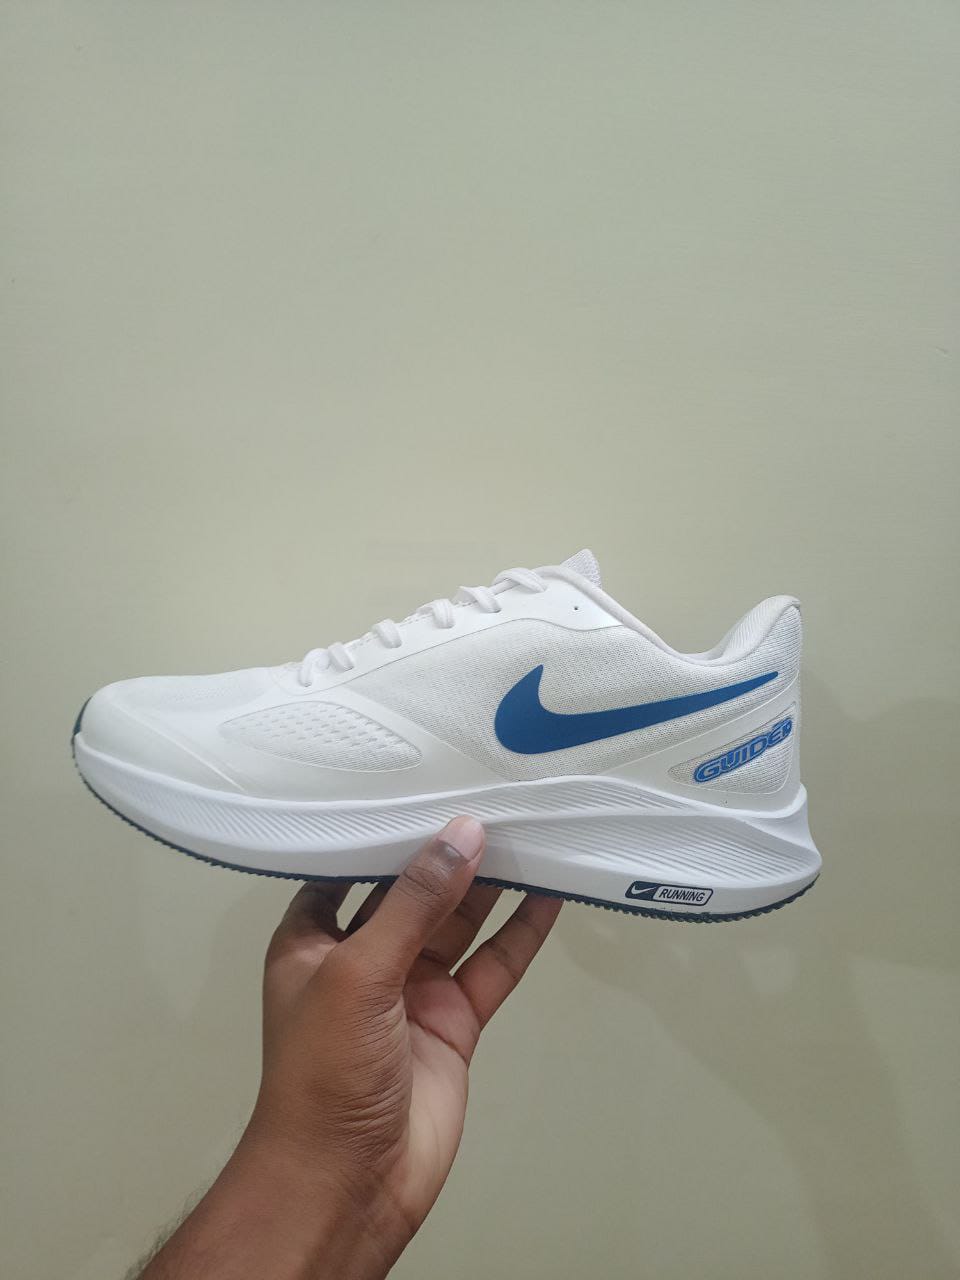 Nike Guide 10 White - The Trendy